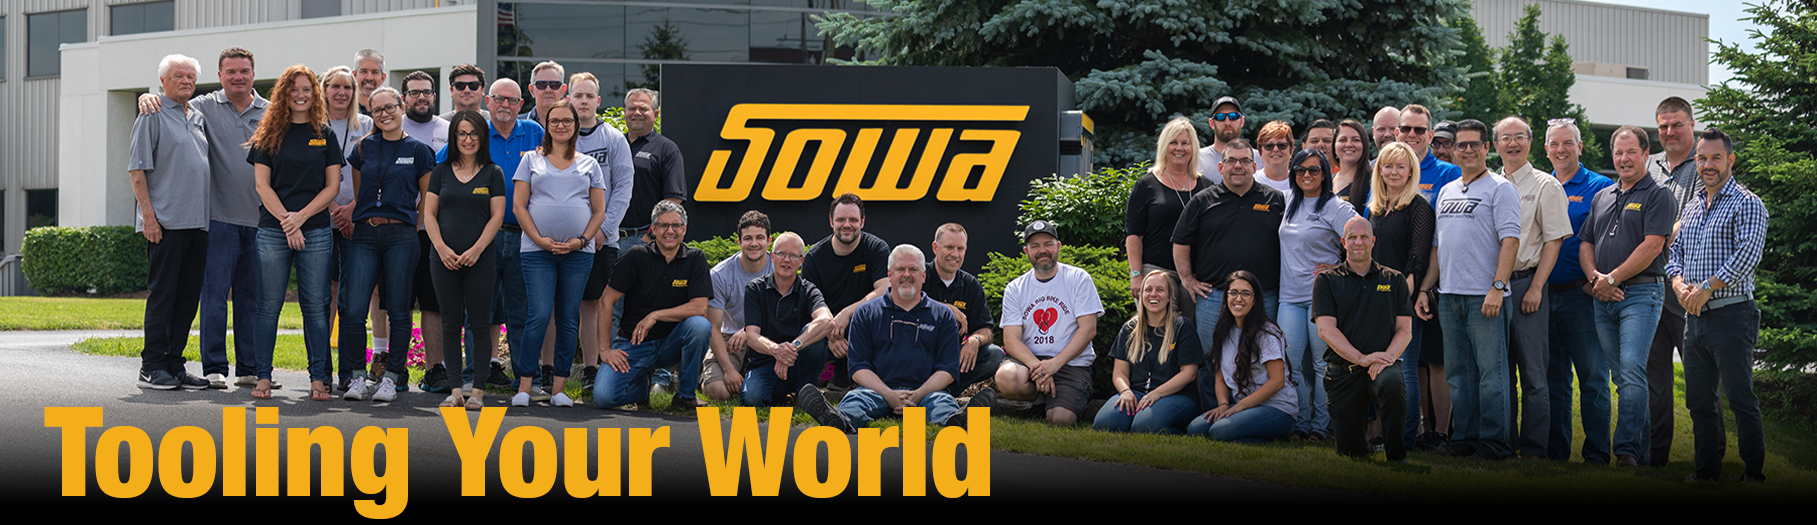 Sowa Tool About Us